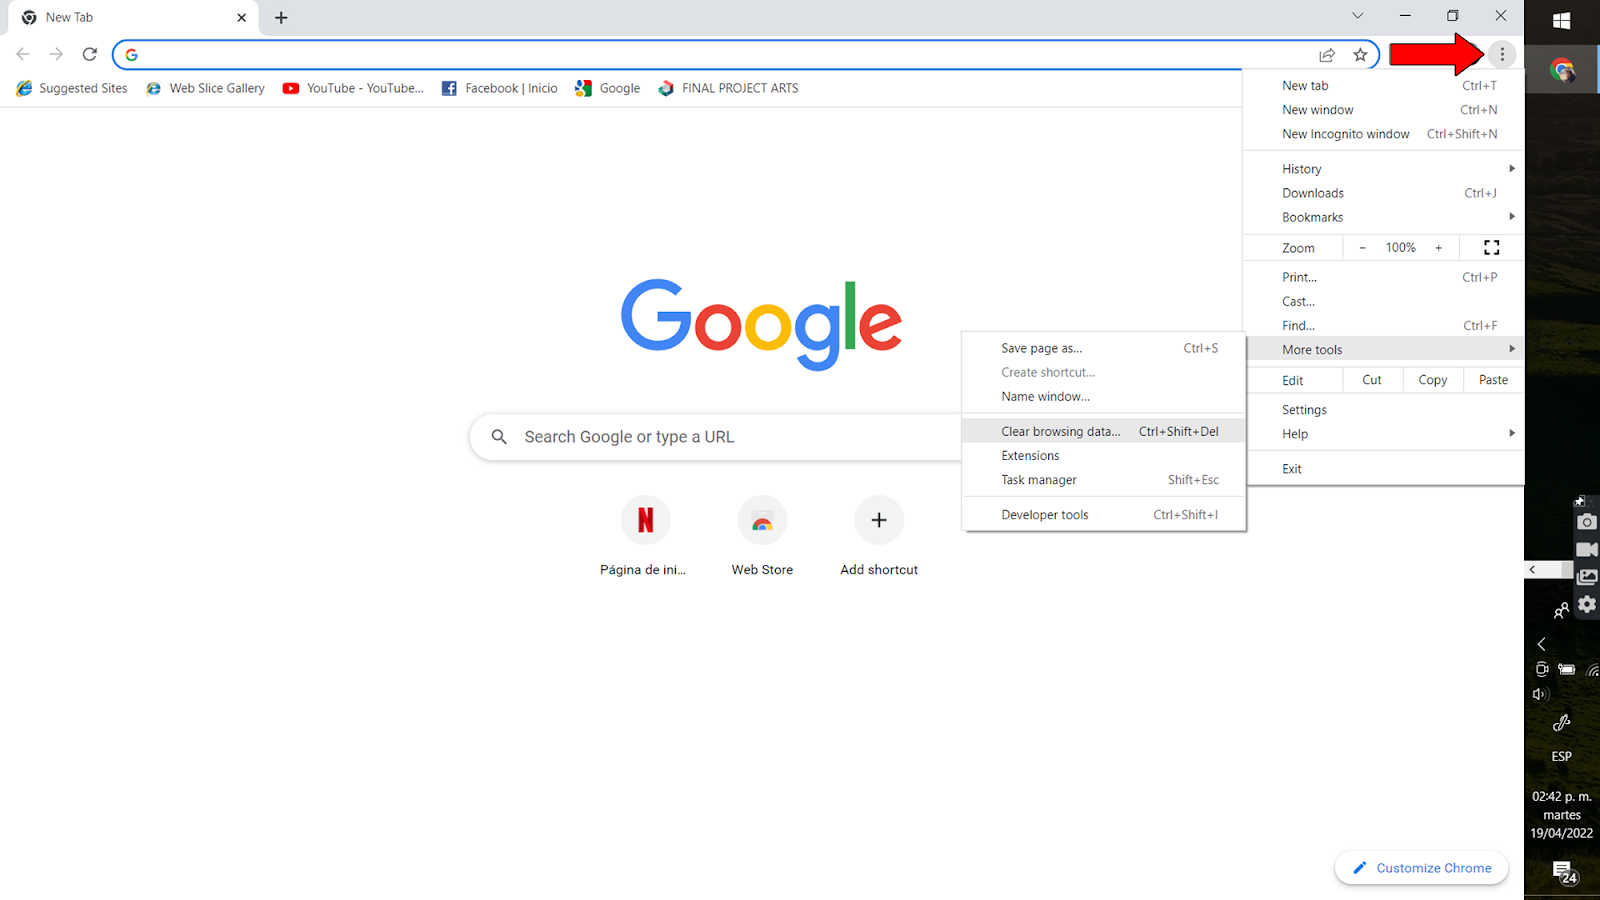 How to clear browsing data on Google Chrome